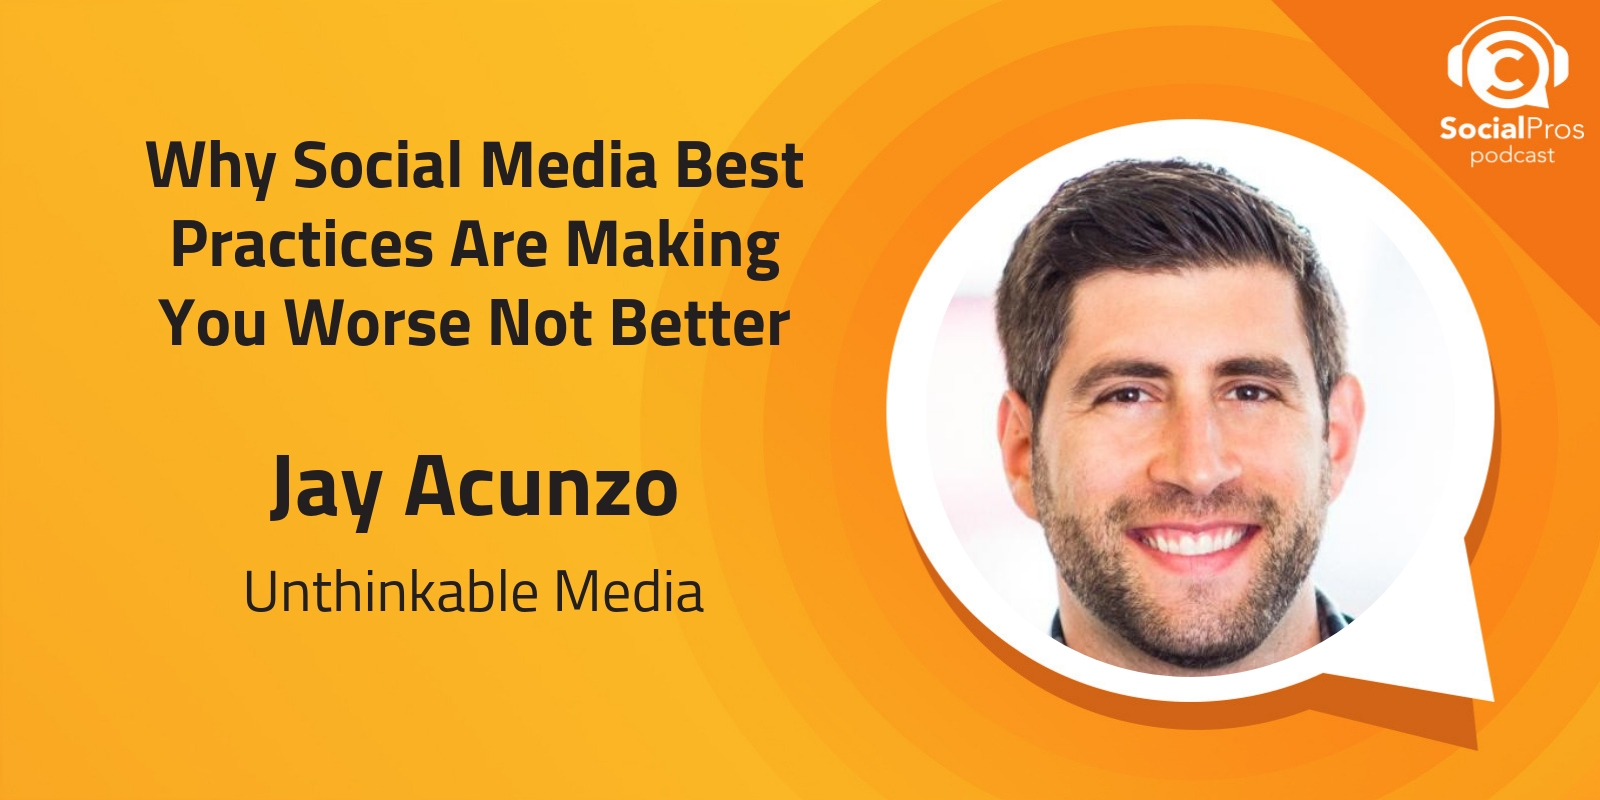 Why Social Media Best Practices Are Making You Worse, Not Better